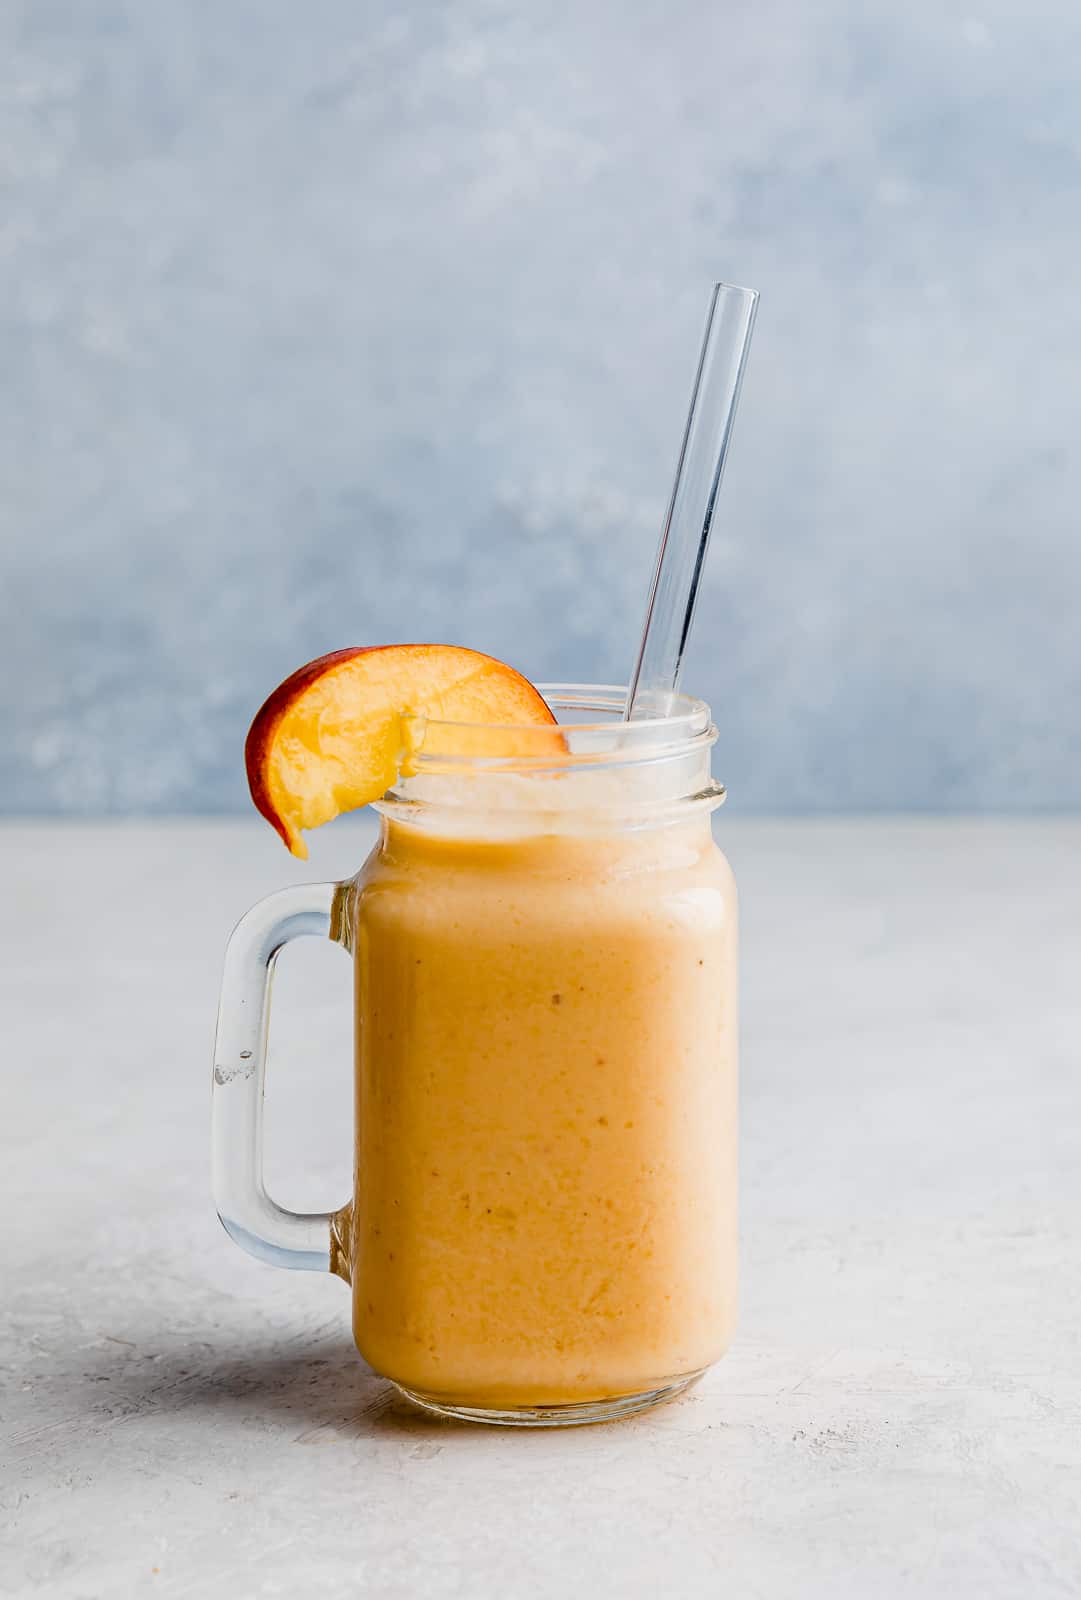 A banana peach smoothie in a glass cup with a fresh peach slice on the rim.